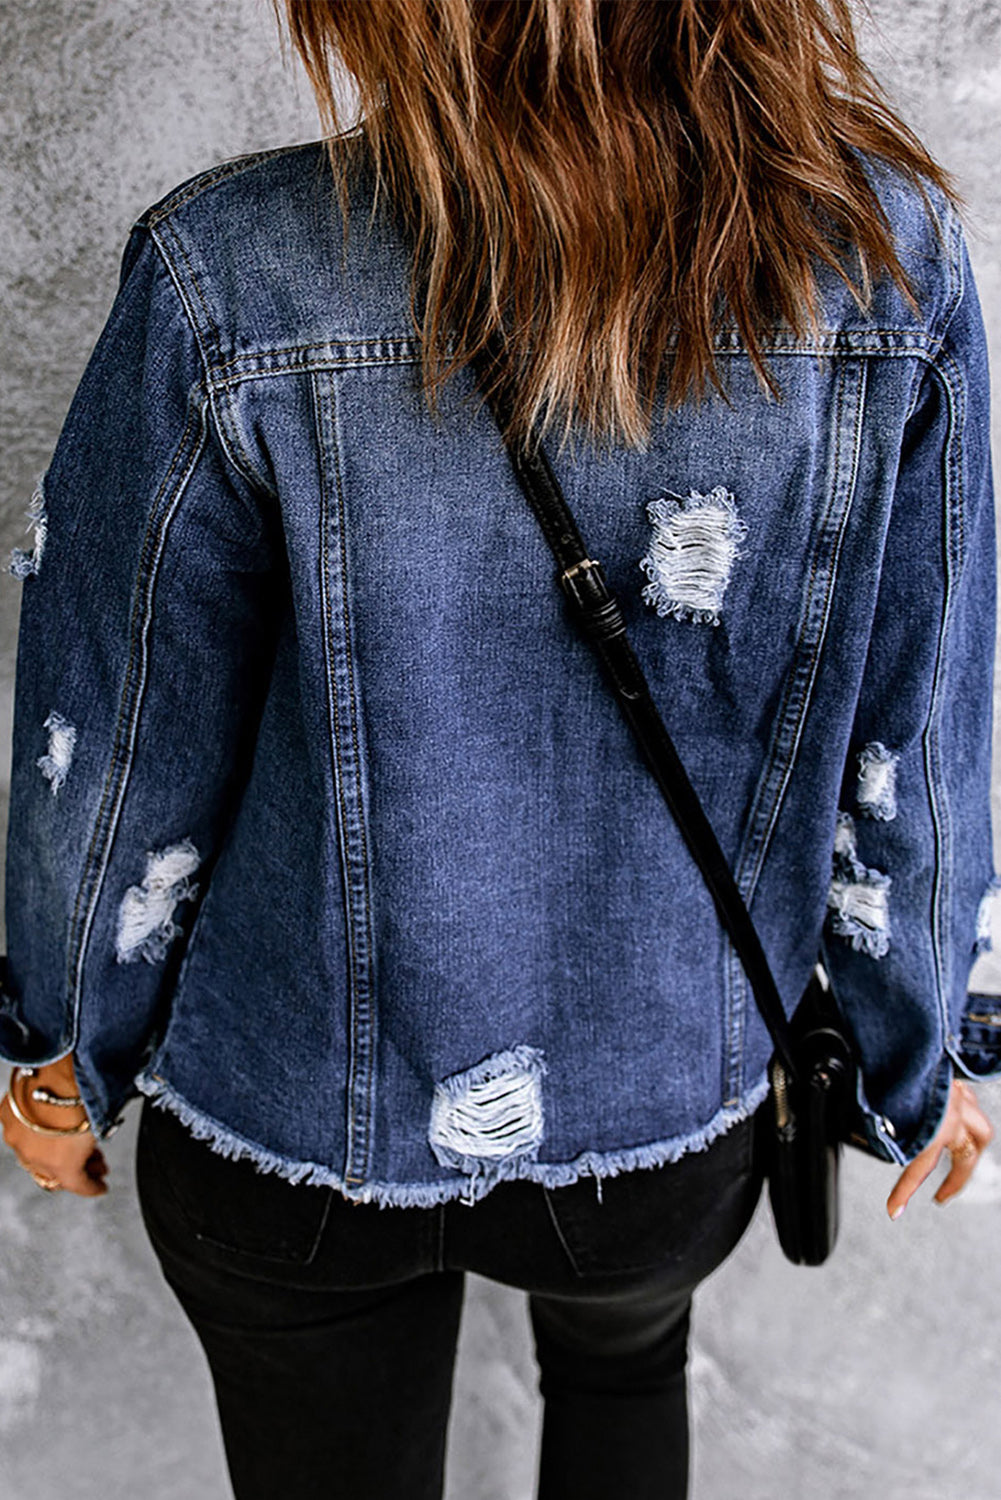 Denim Jacket with Mixed Print in Distressed Style for Women